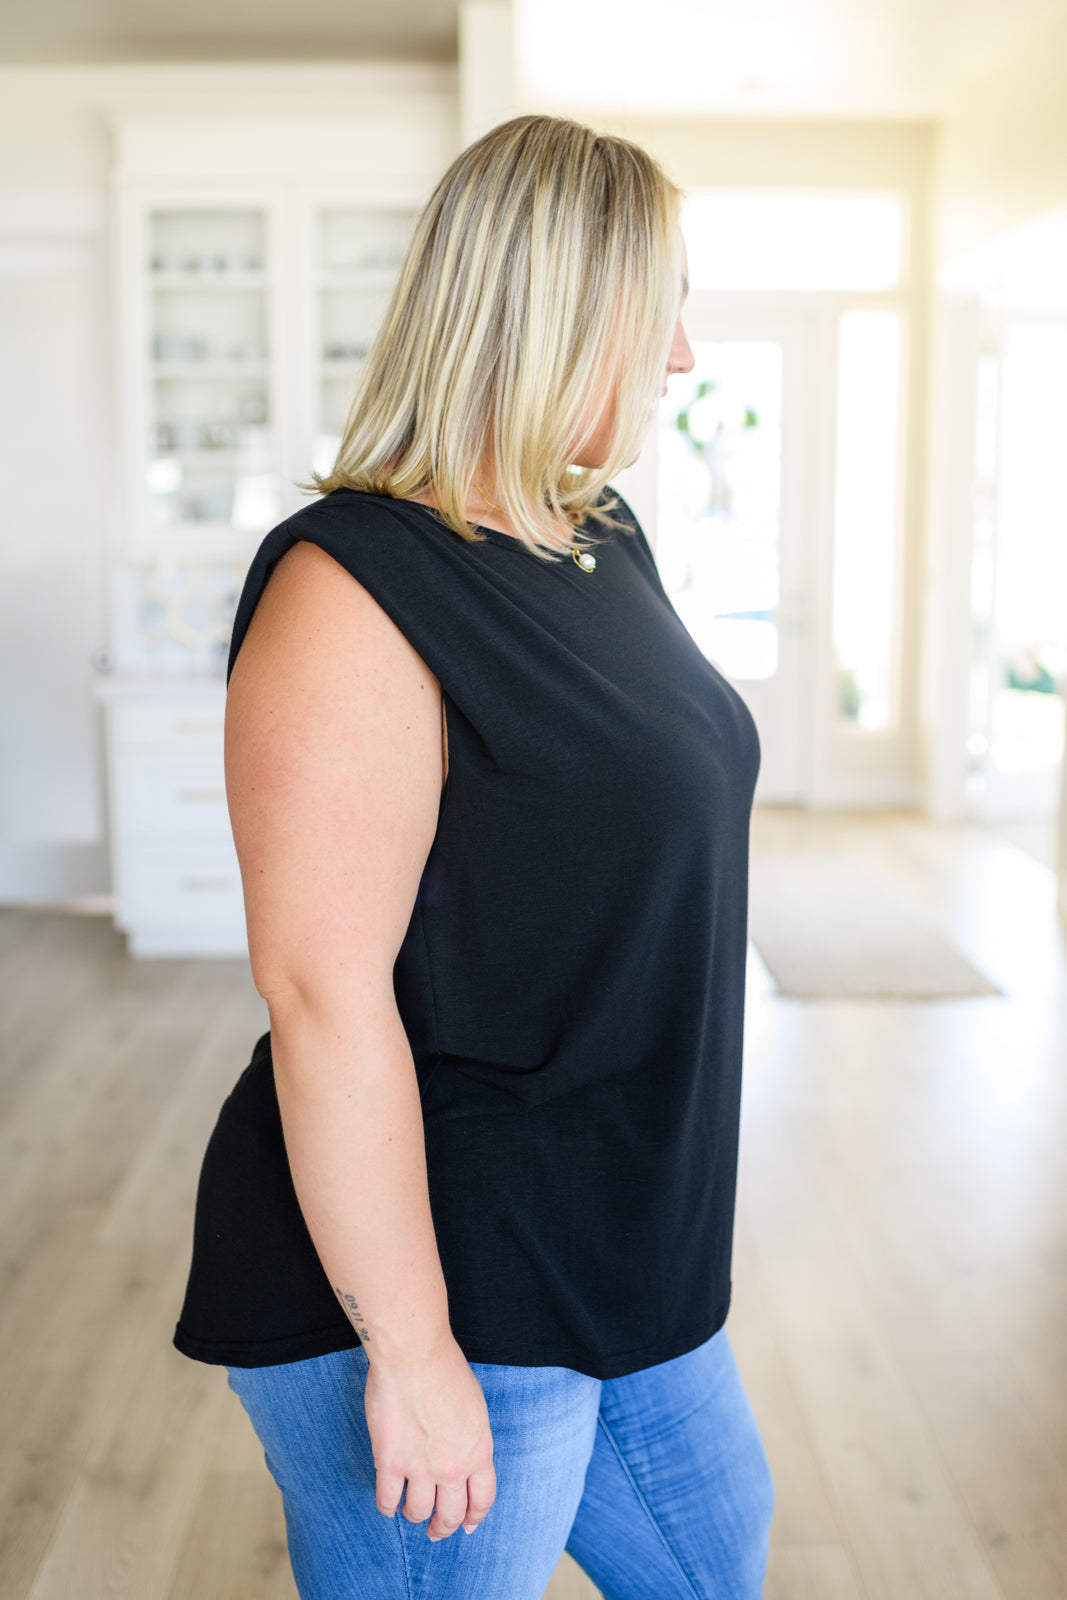 This Juke Box Hero Shoulder Pad Top is perfect for your next night out. Crafted with comfy jersey knit material, it features sewn in shoulder pads for a flattering fit and side slits for a modern, edgy look. Its stretchy material allows for versatile styling. Get ready to turn heads! S - 3X